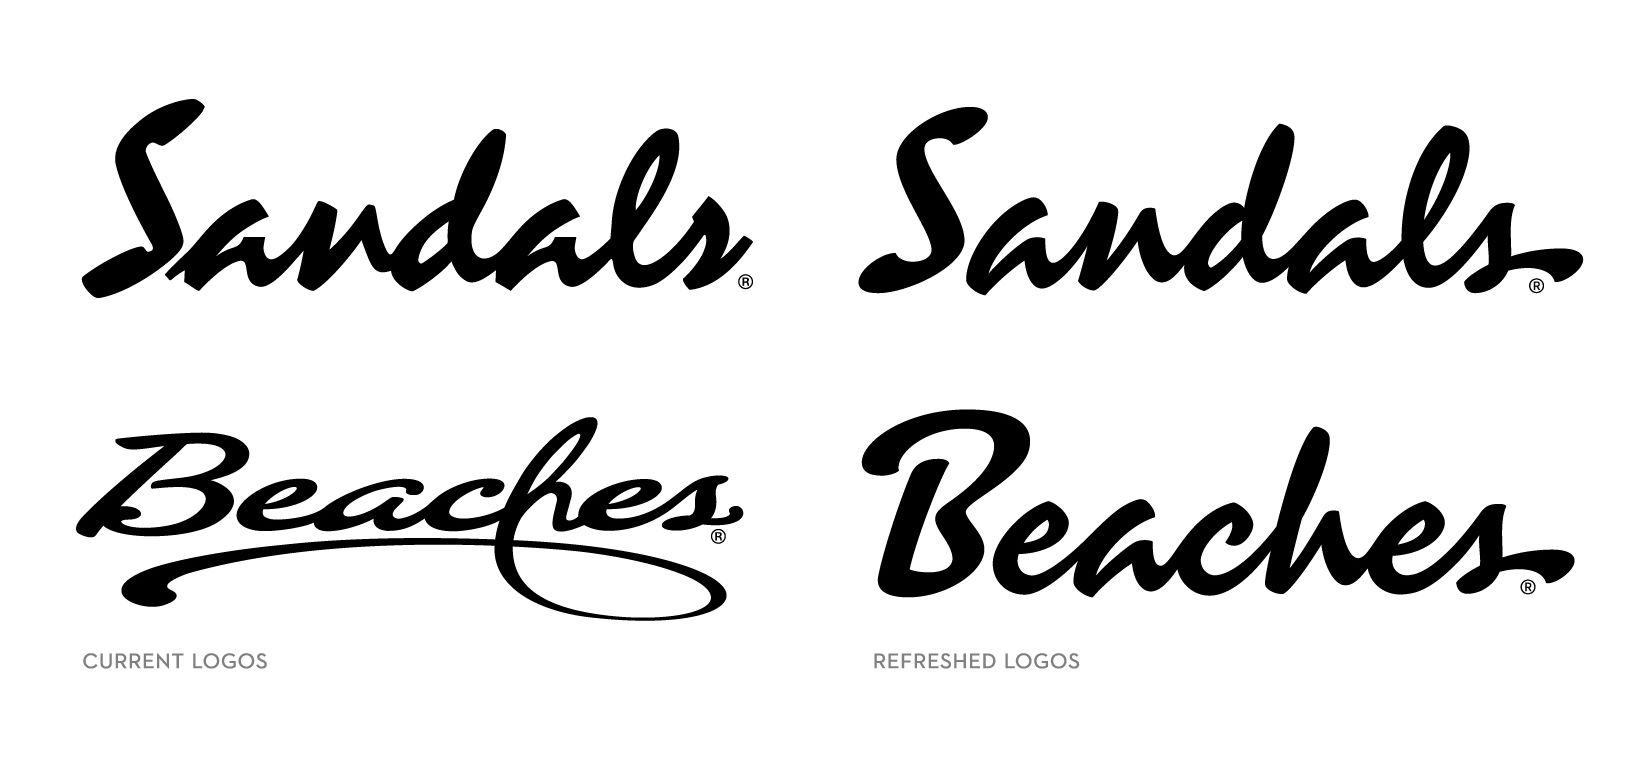 House-Ind_Sandals-Beaches_Refreshed-Logos_V3